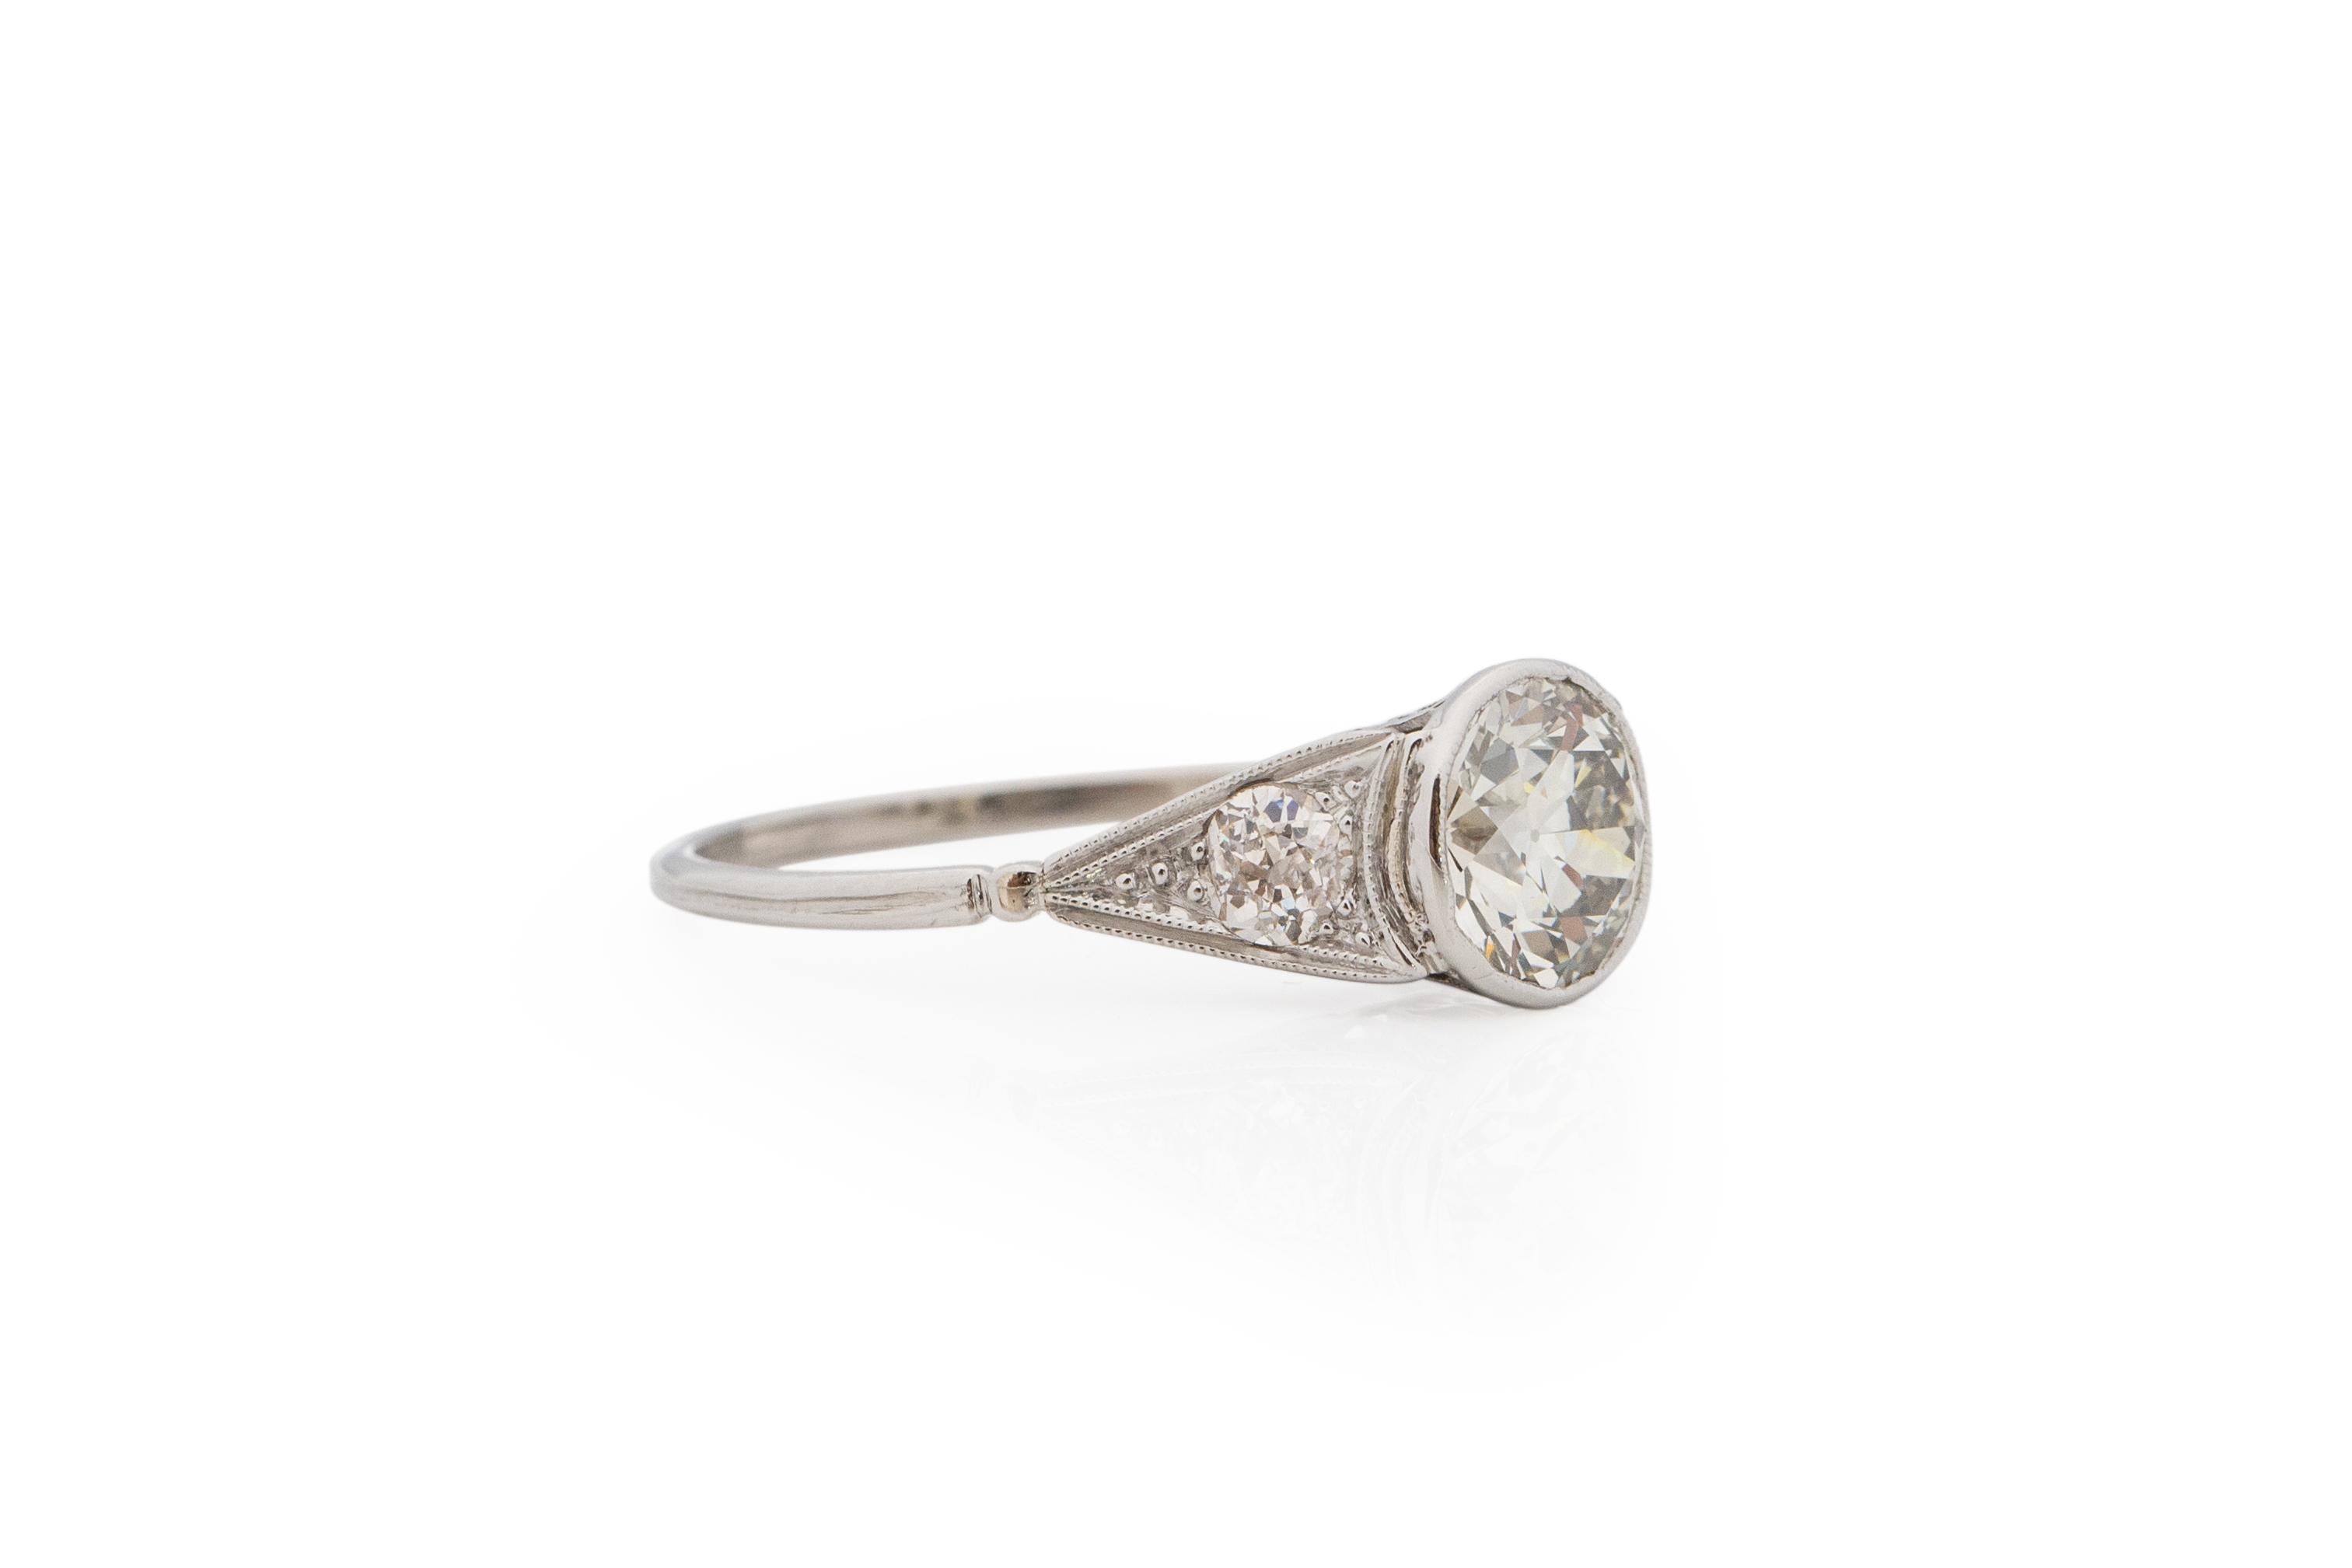 Ring Size: 7.25
Metal Type: Platinum [Hallmarked, and Tested]
Weight: 3.2 grams

Center Diamond Details:
GIA REPORT #: 6214579794
Weight: 1.41
Cut: Old European brilliant
Color: M
Clarity: SI2
Measurements: 7.18 x 7.16 x 4.38mm

Side Stone